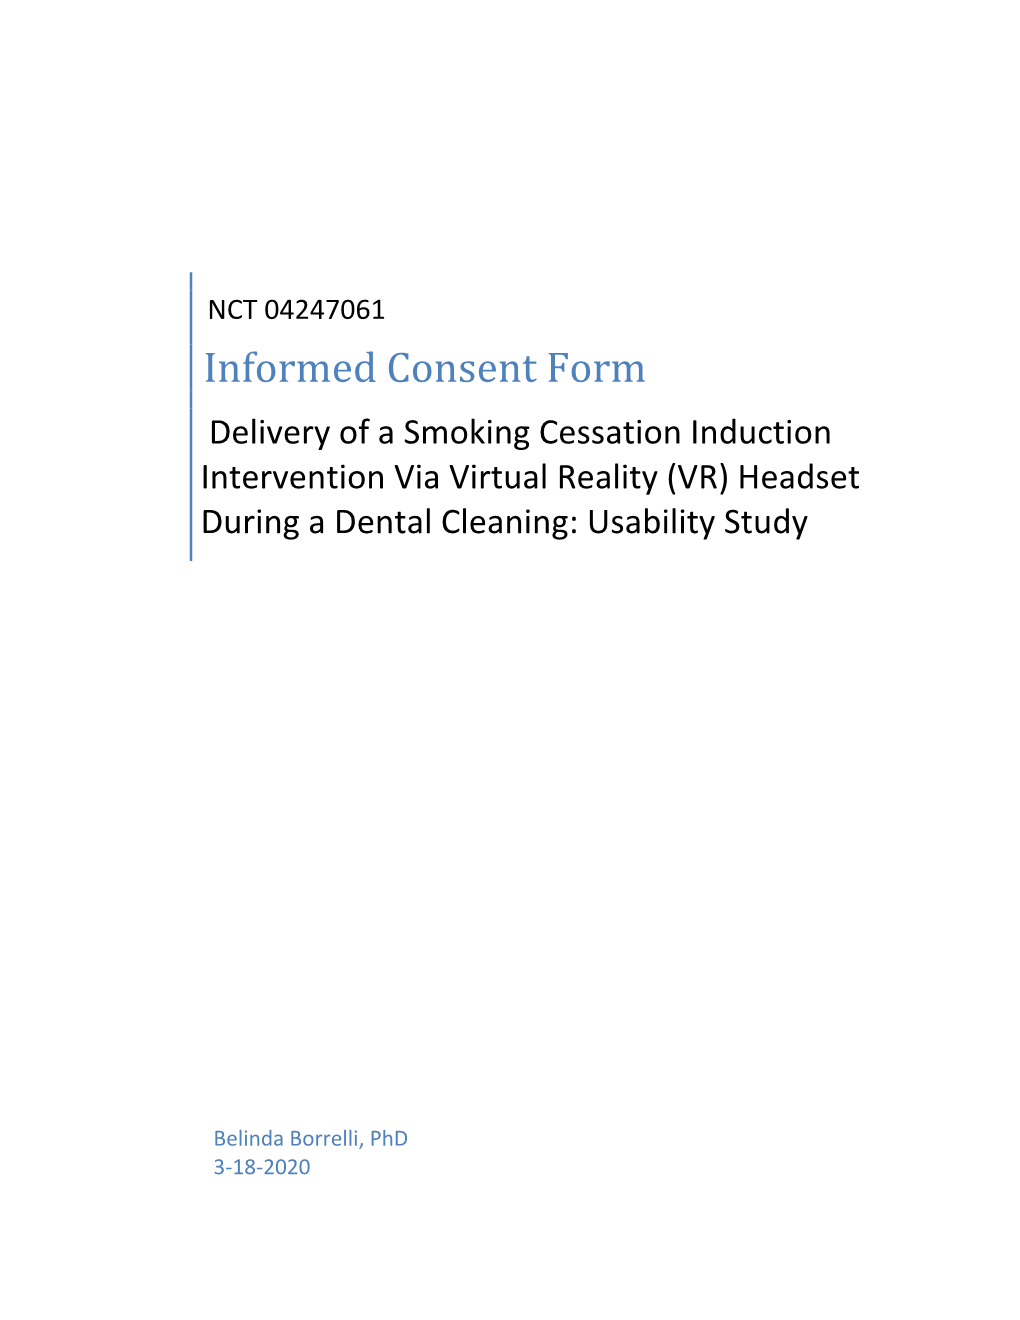 Informed Consent Form Delivery of a Smoking Cessation Induction Intervention Via Virtual Reality (VR) Headset During a Dental Cleaning: Usability Study